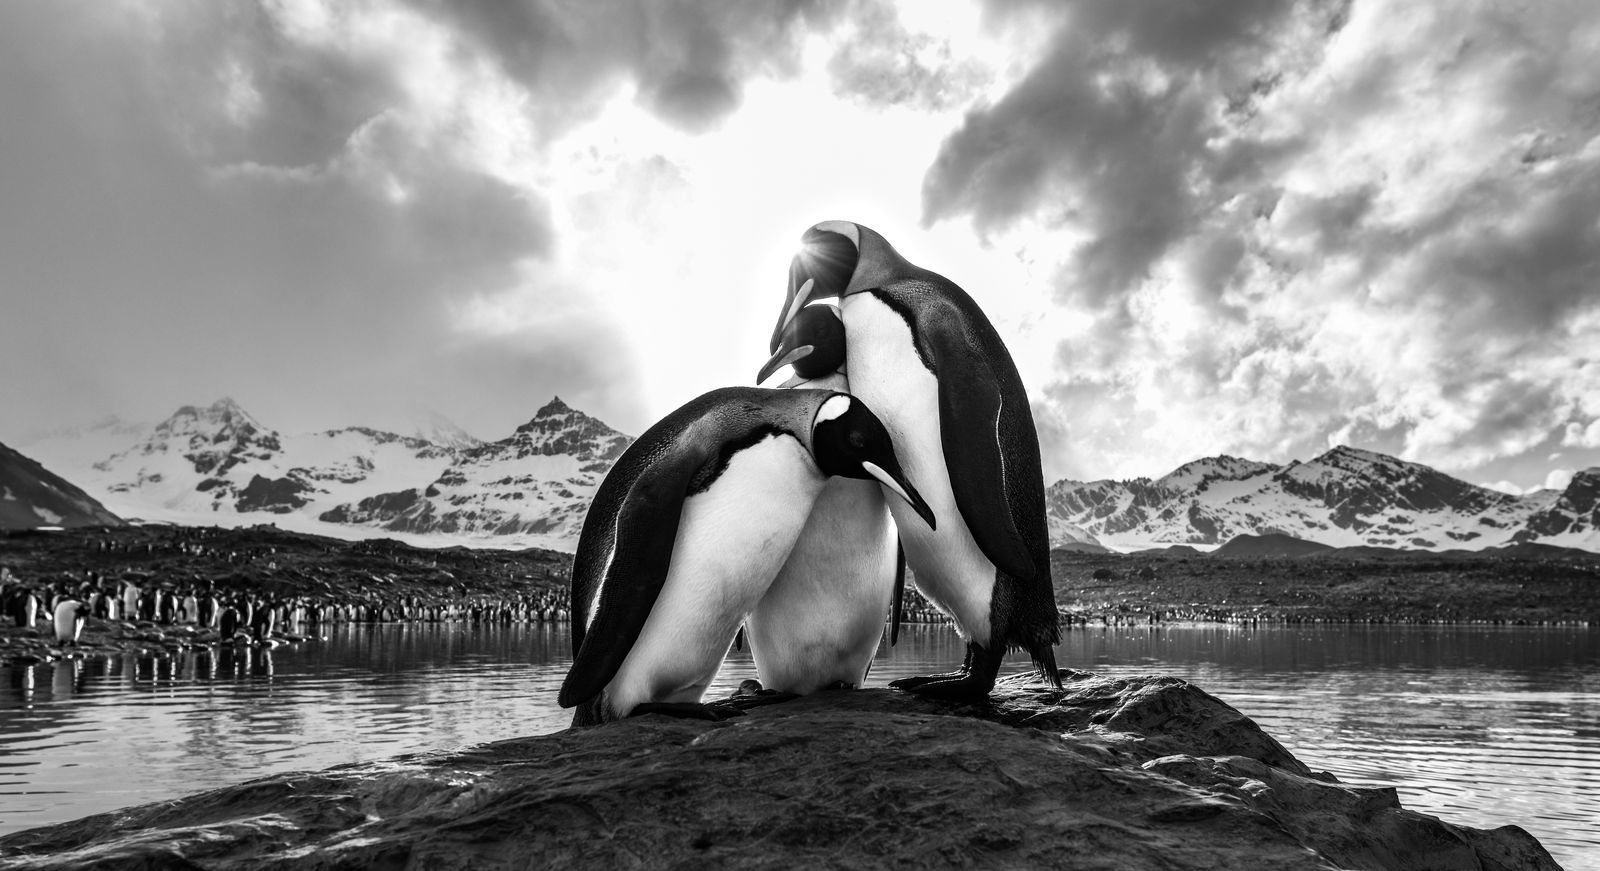 Photograph by Jonathan Lee, National Geographic Your Shot